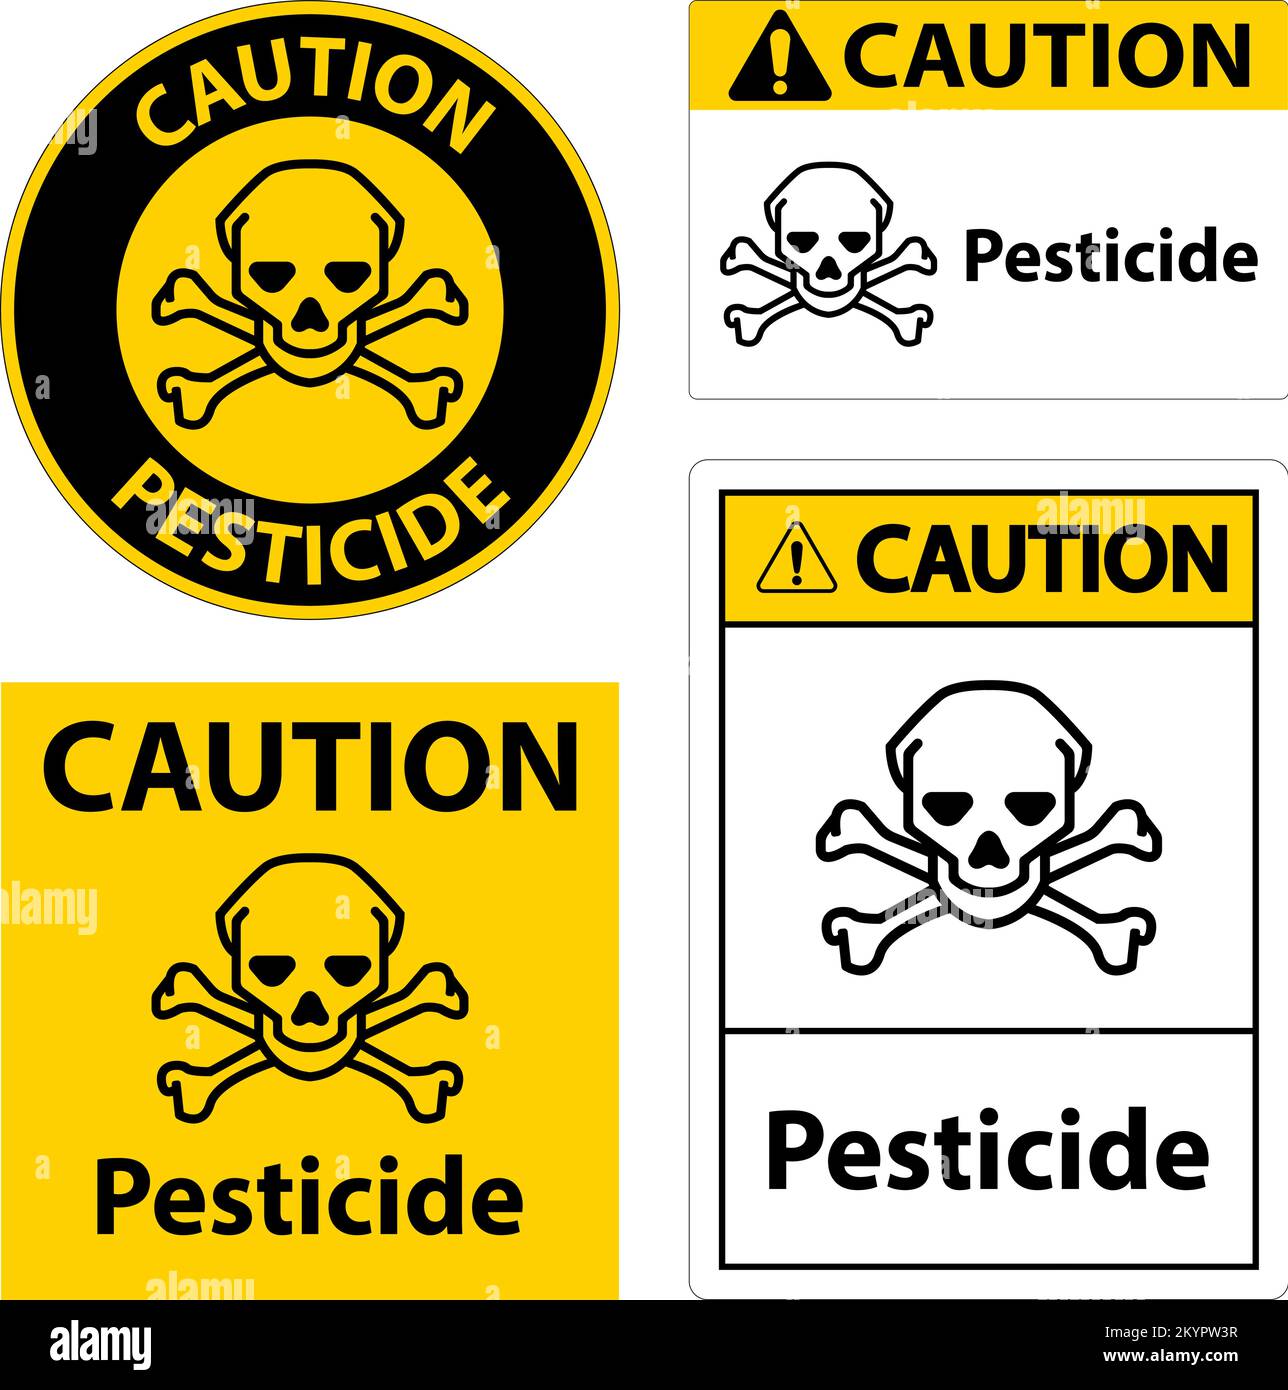 Caution Pesticide Symbol Sign On White Background Stock Vector